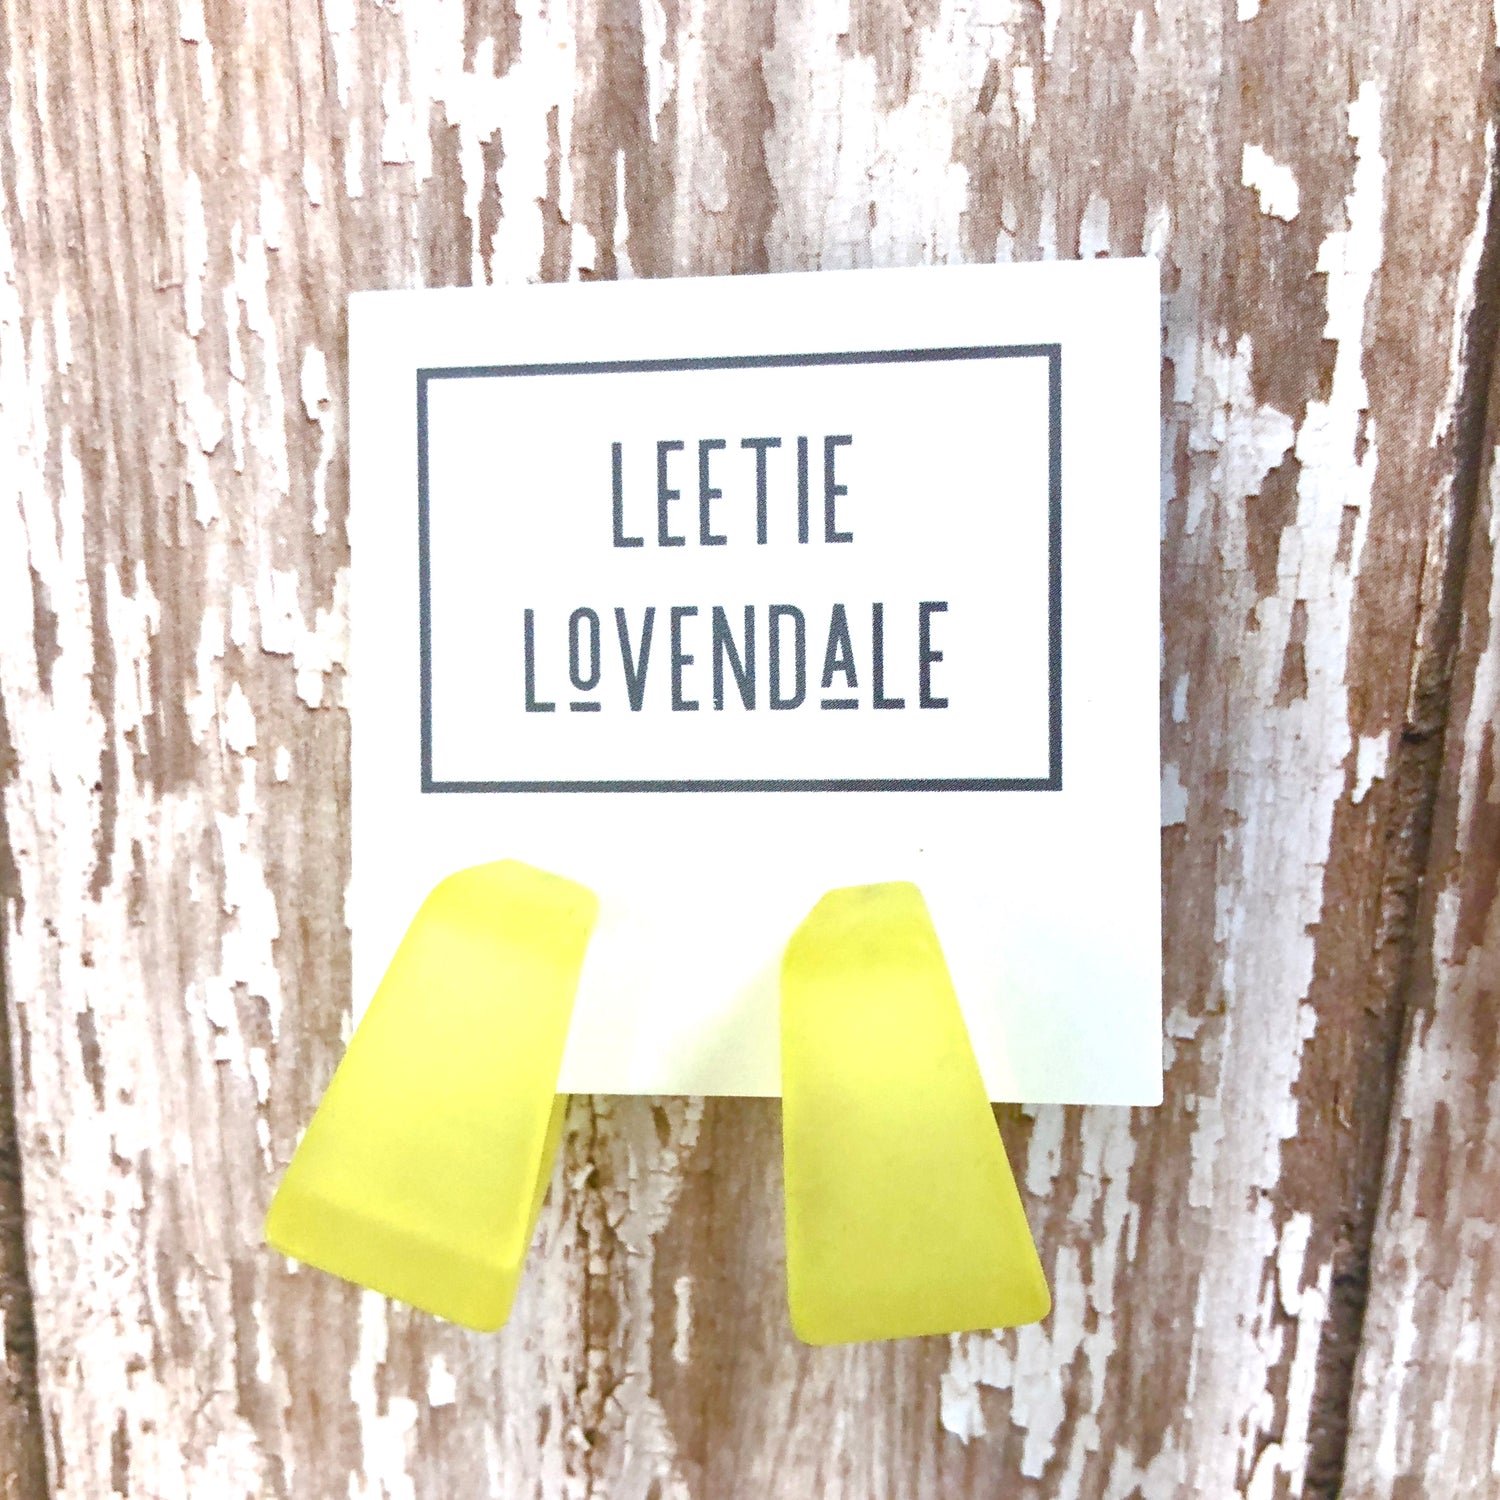 Lemon Yellow Wide Cubist Square Frosted Hoop Earrings